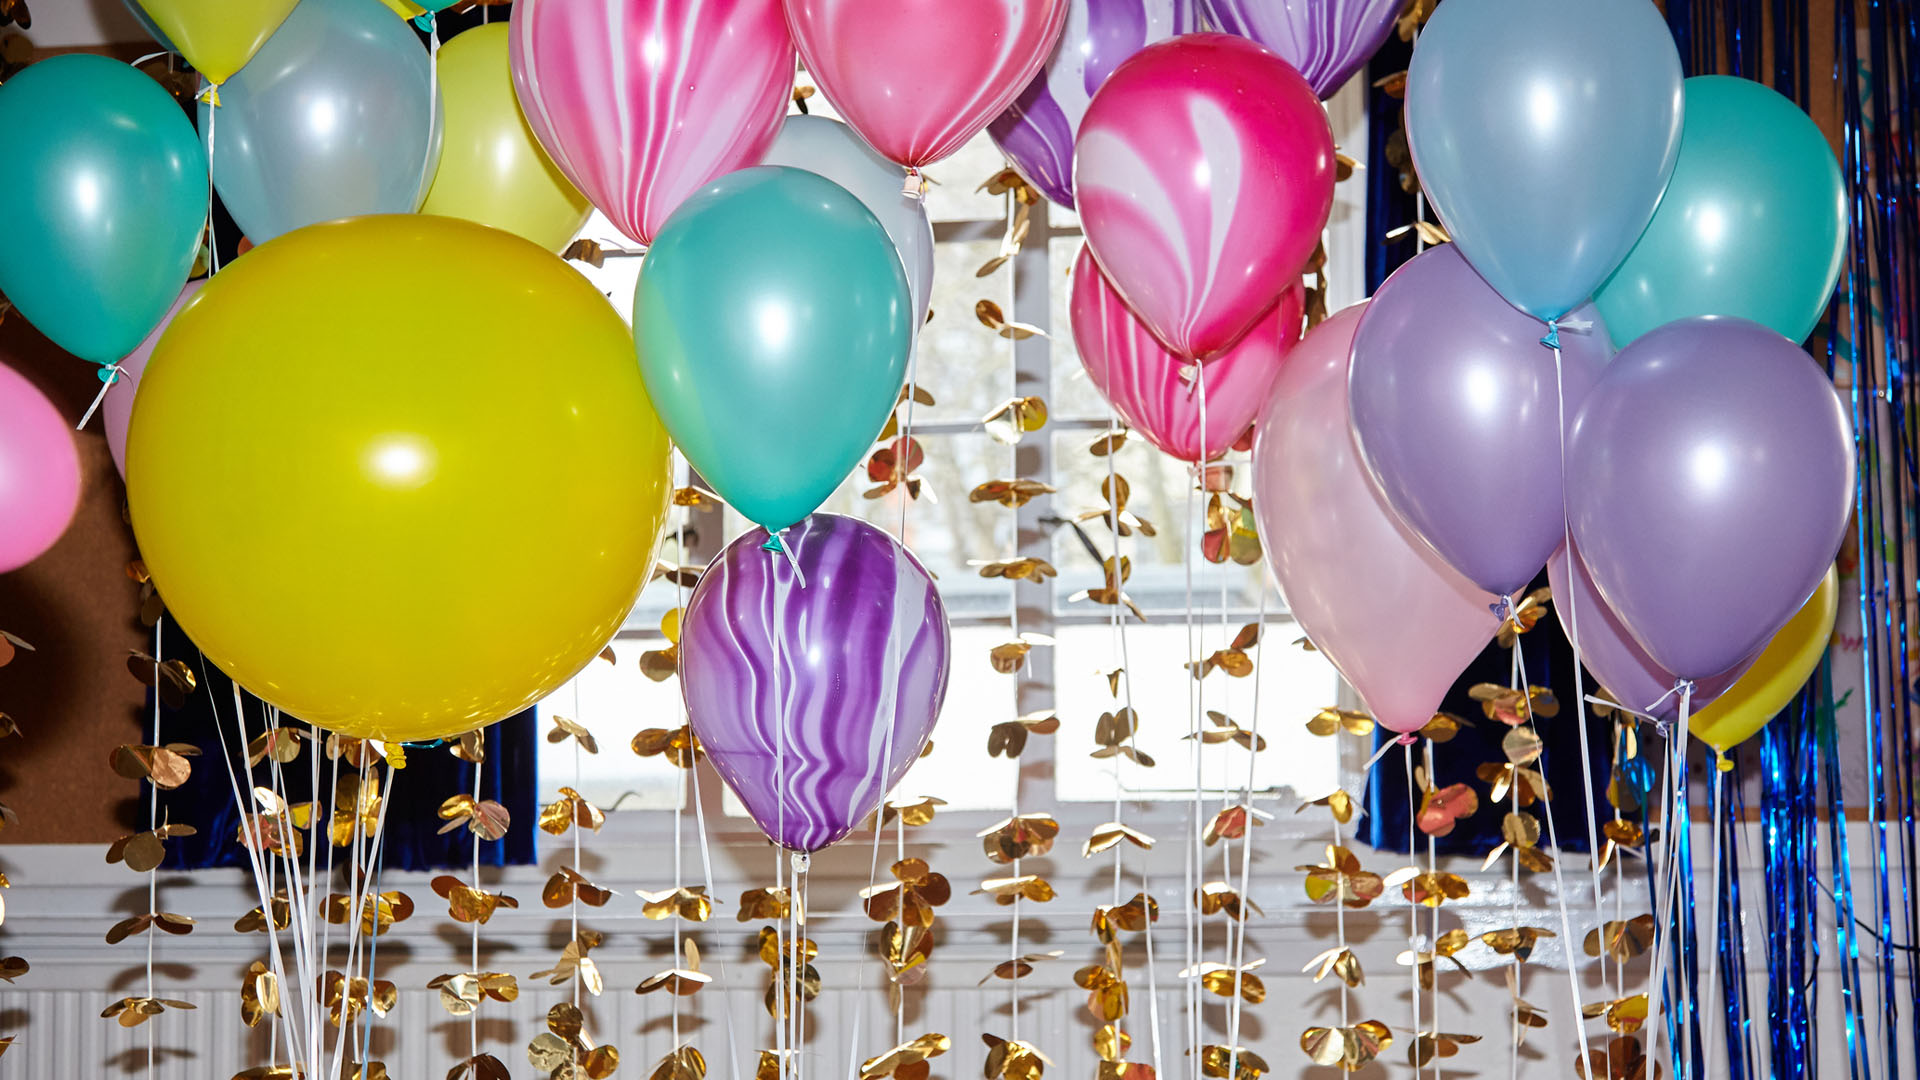 Helium balloons decorating a room